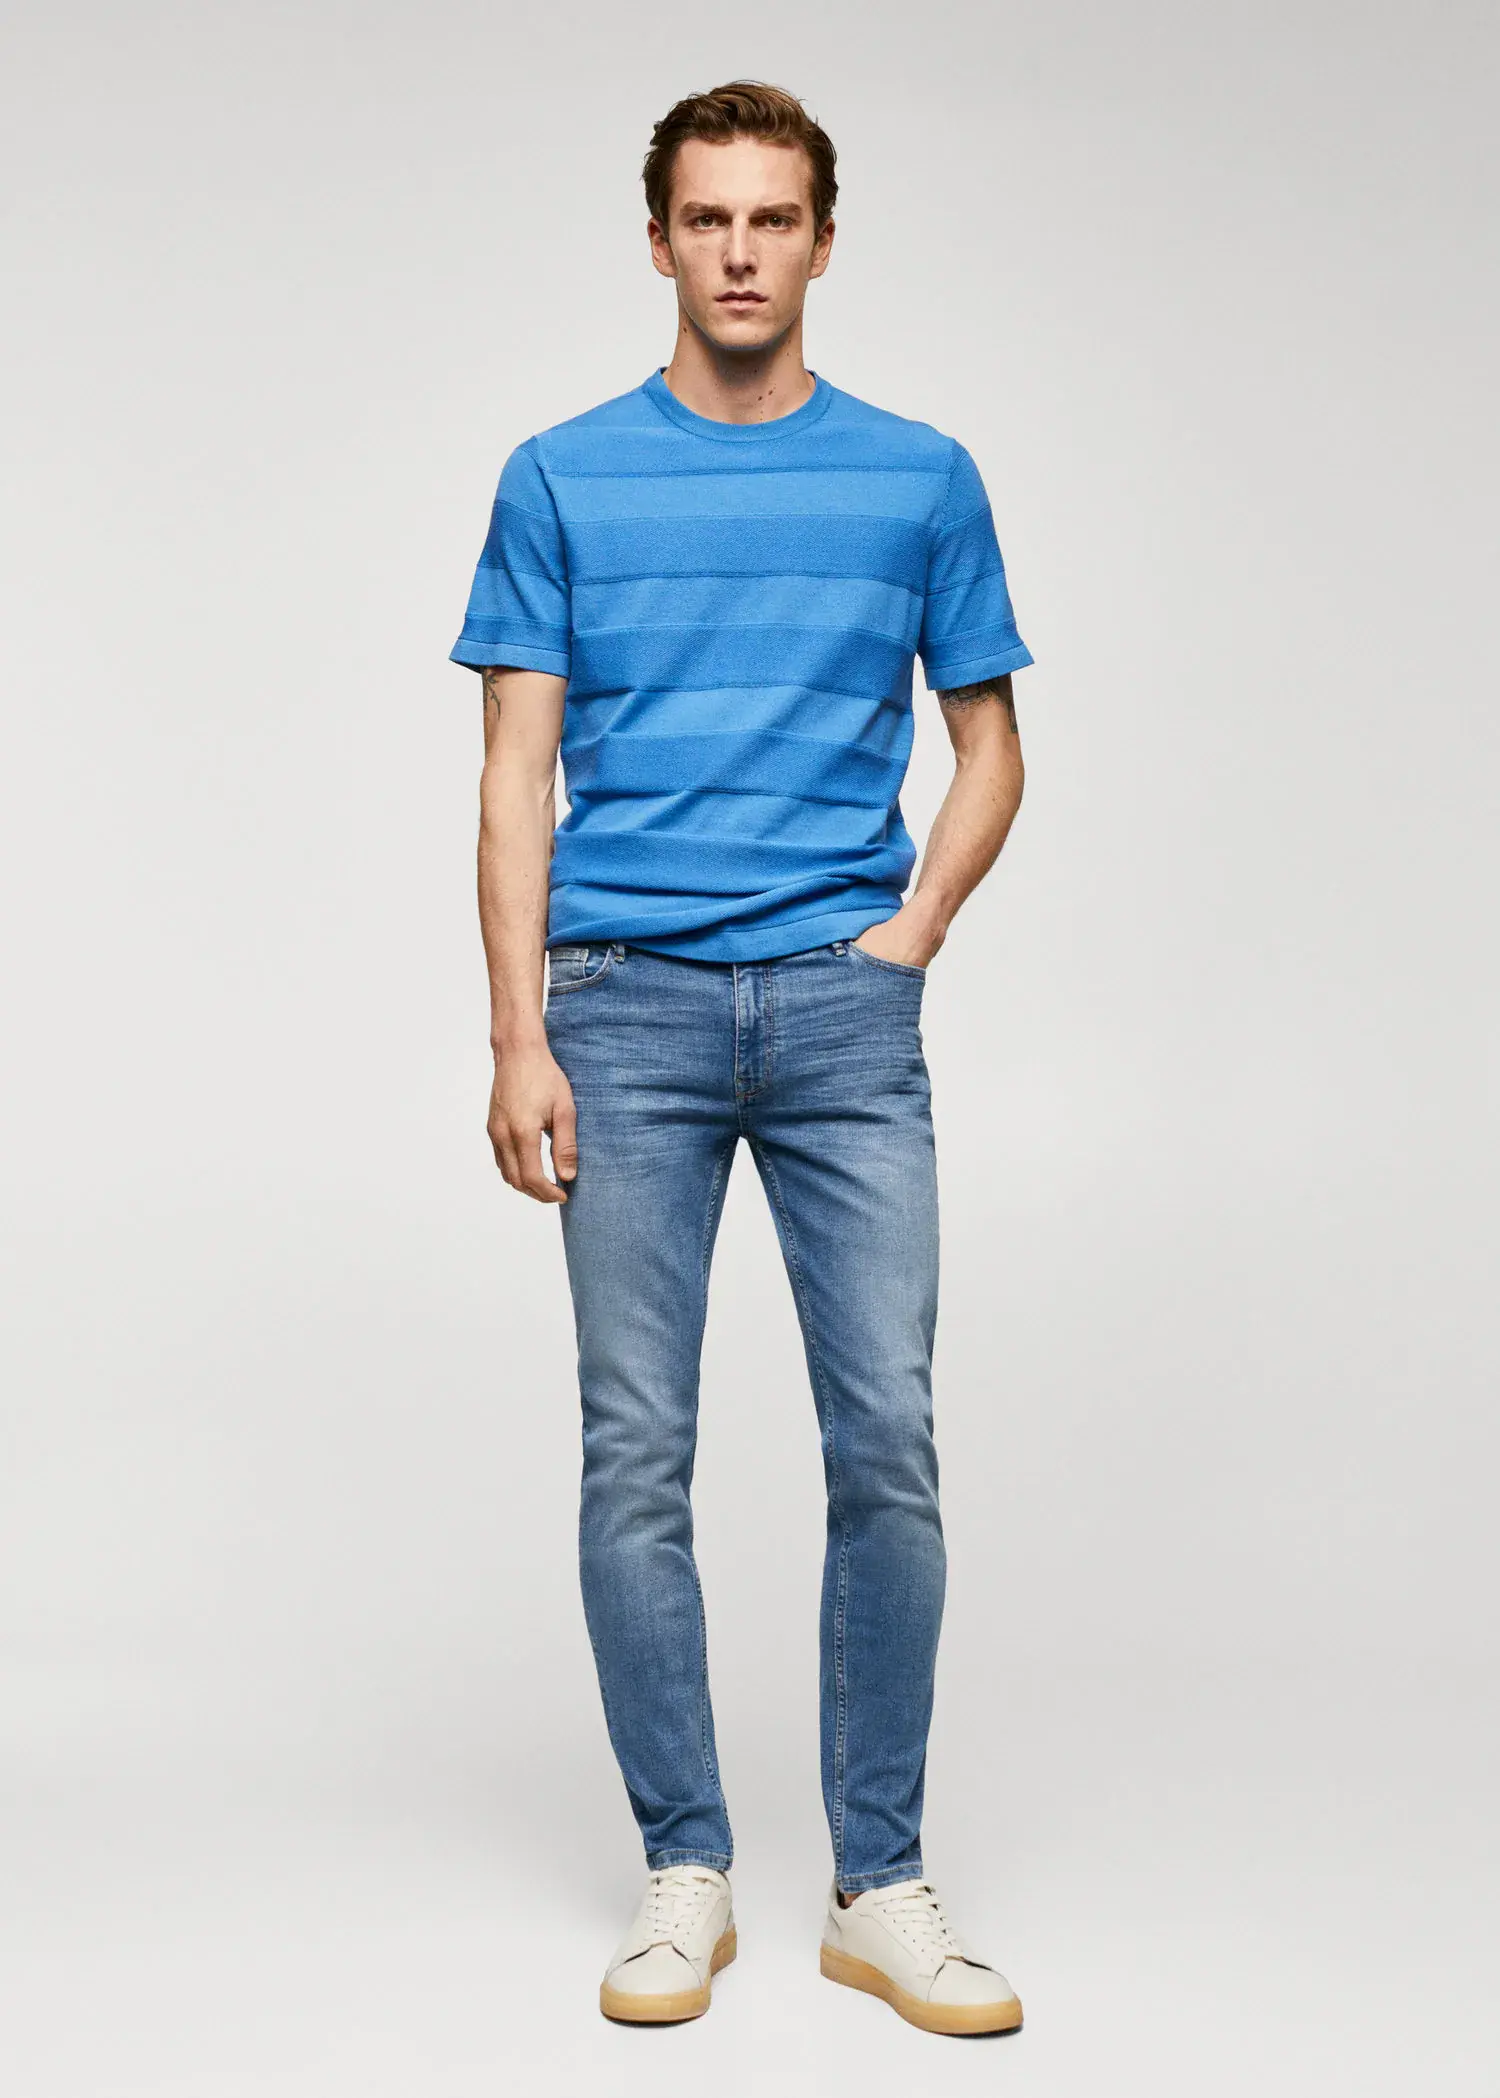 Mango Jude skinny-fit jeans. a man in a blue shirt and jeans. 